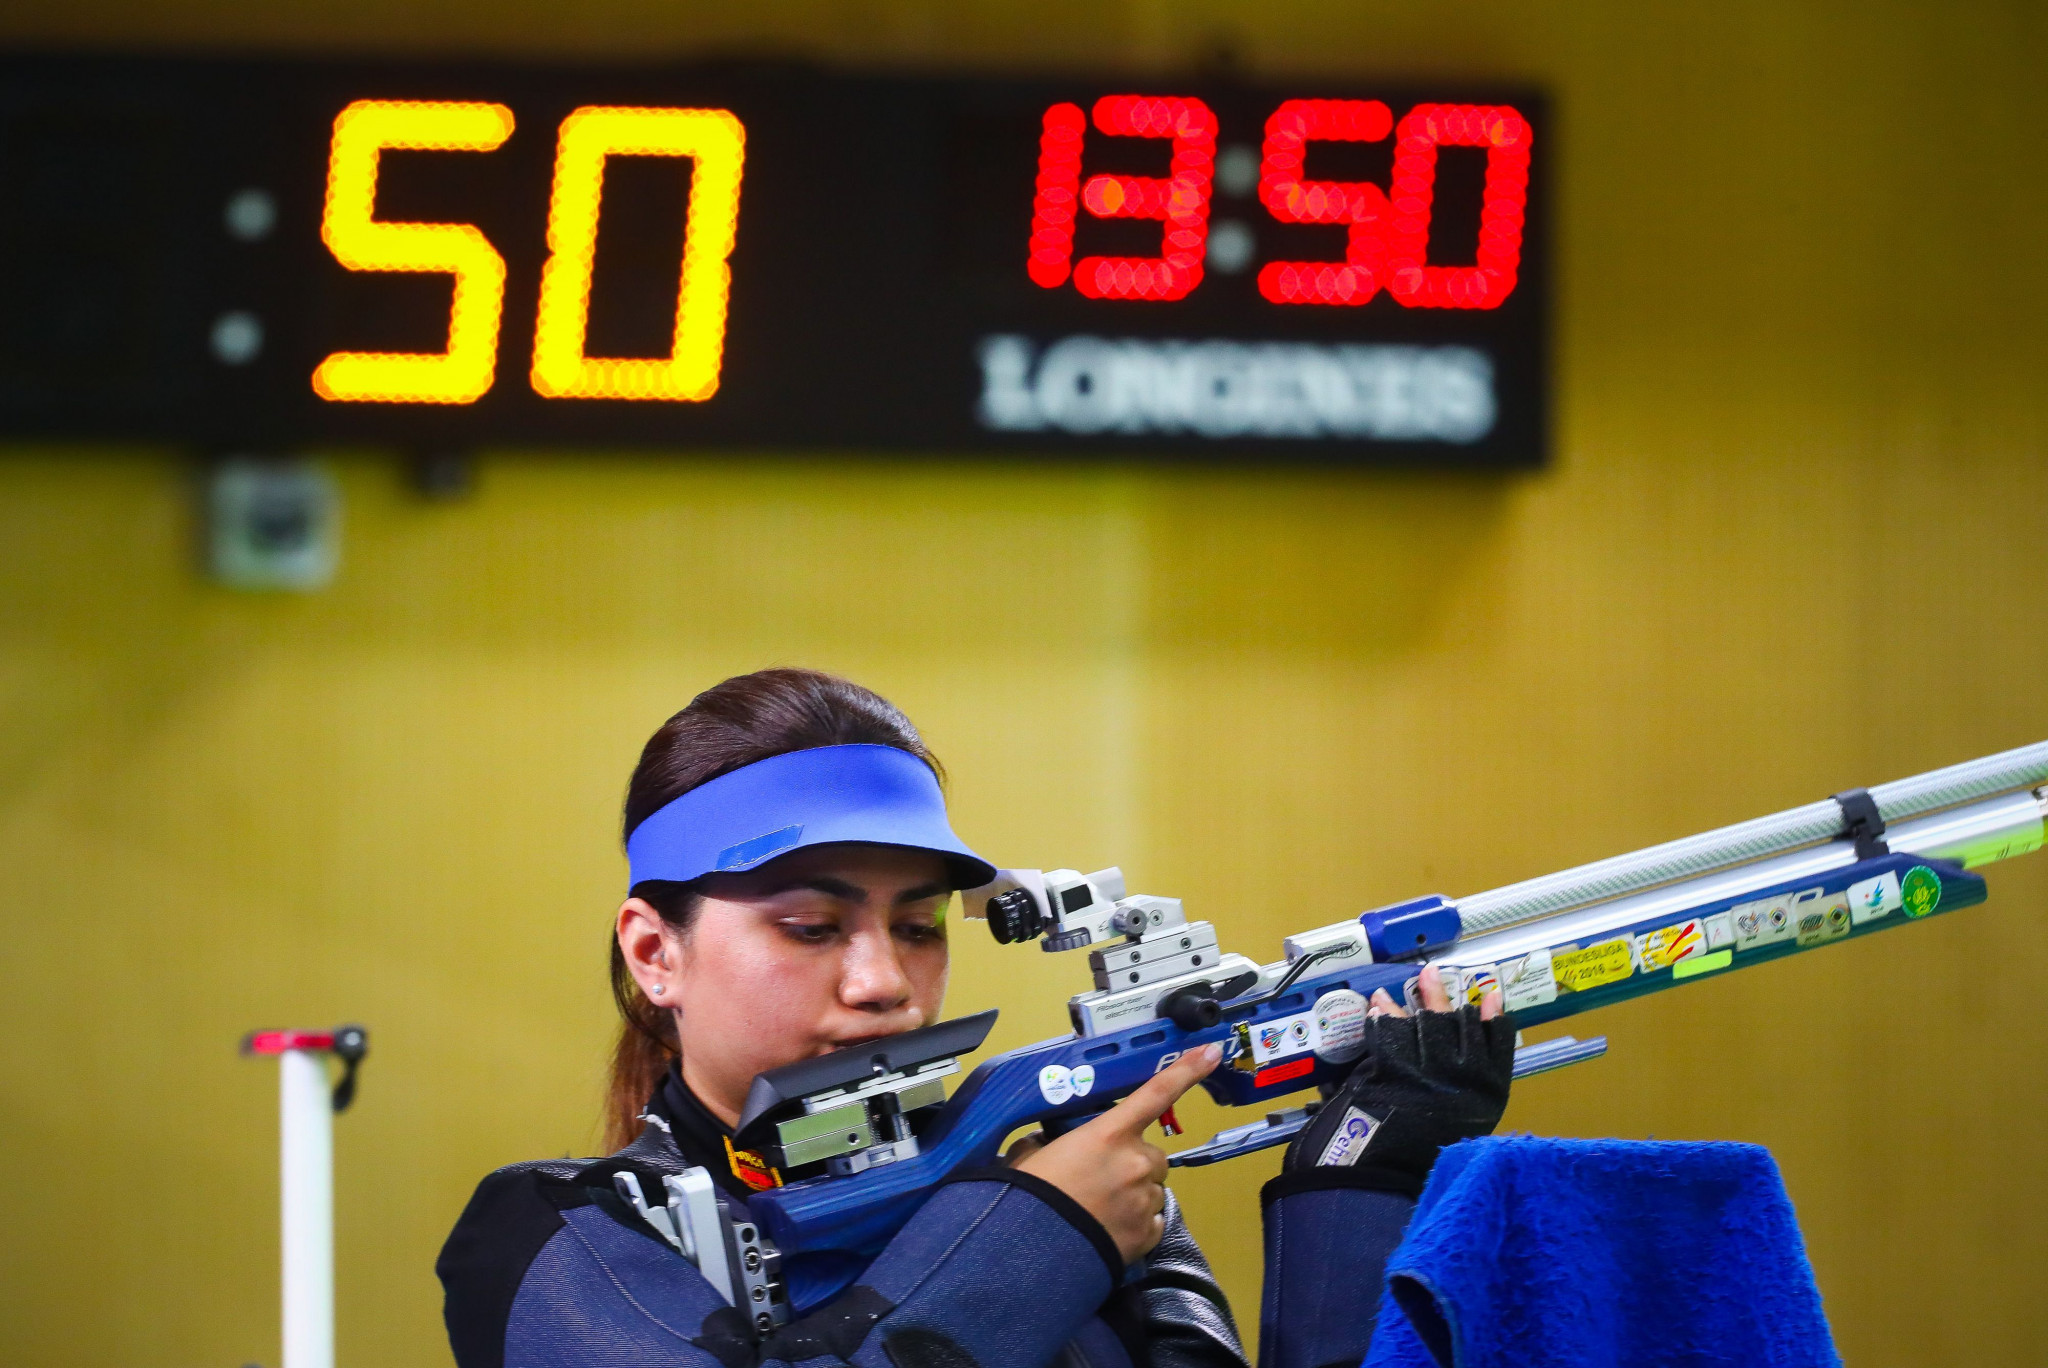 Chandela wins 10m air rifle at ISSF Rifle and Pistol World Cup in Munich